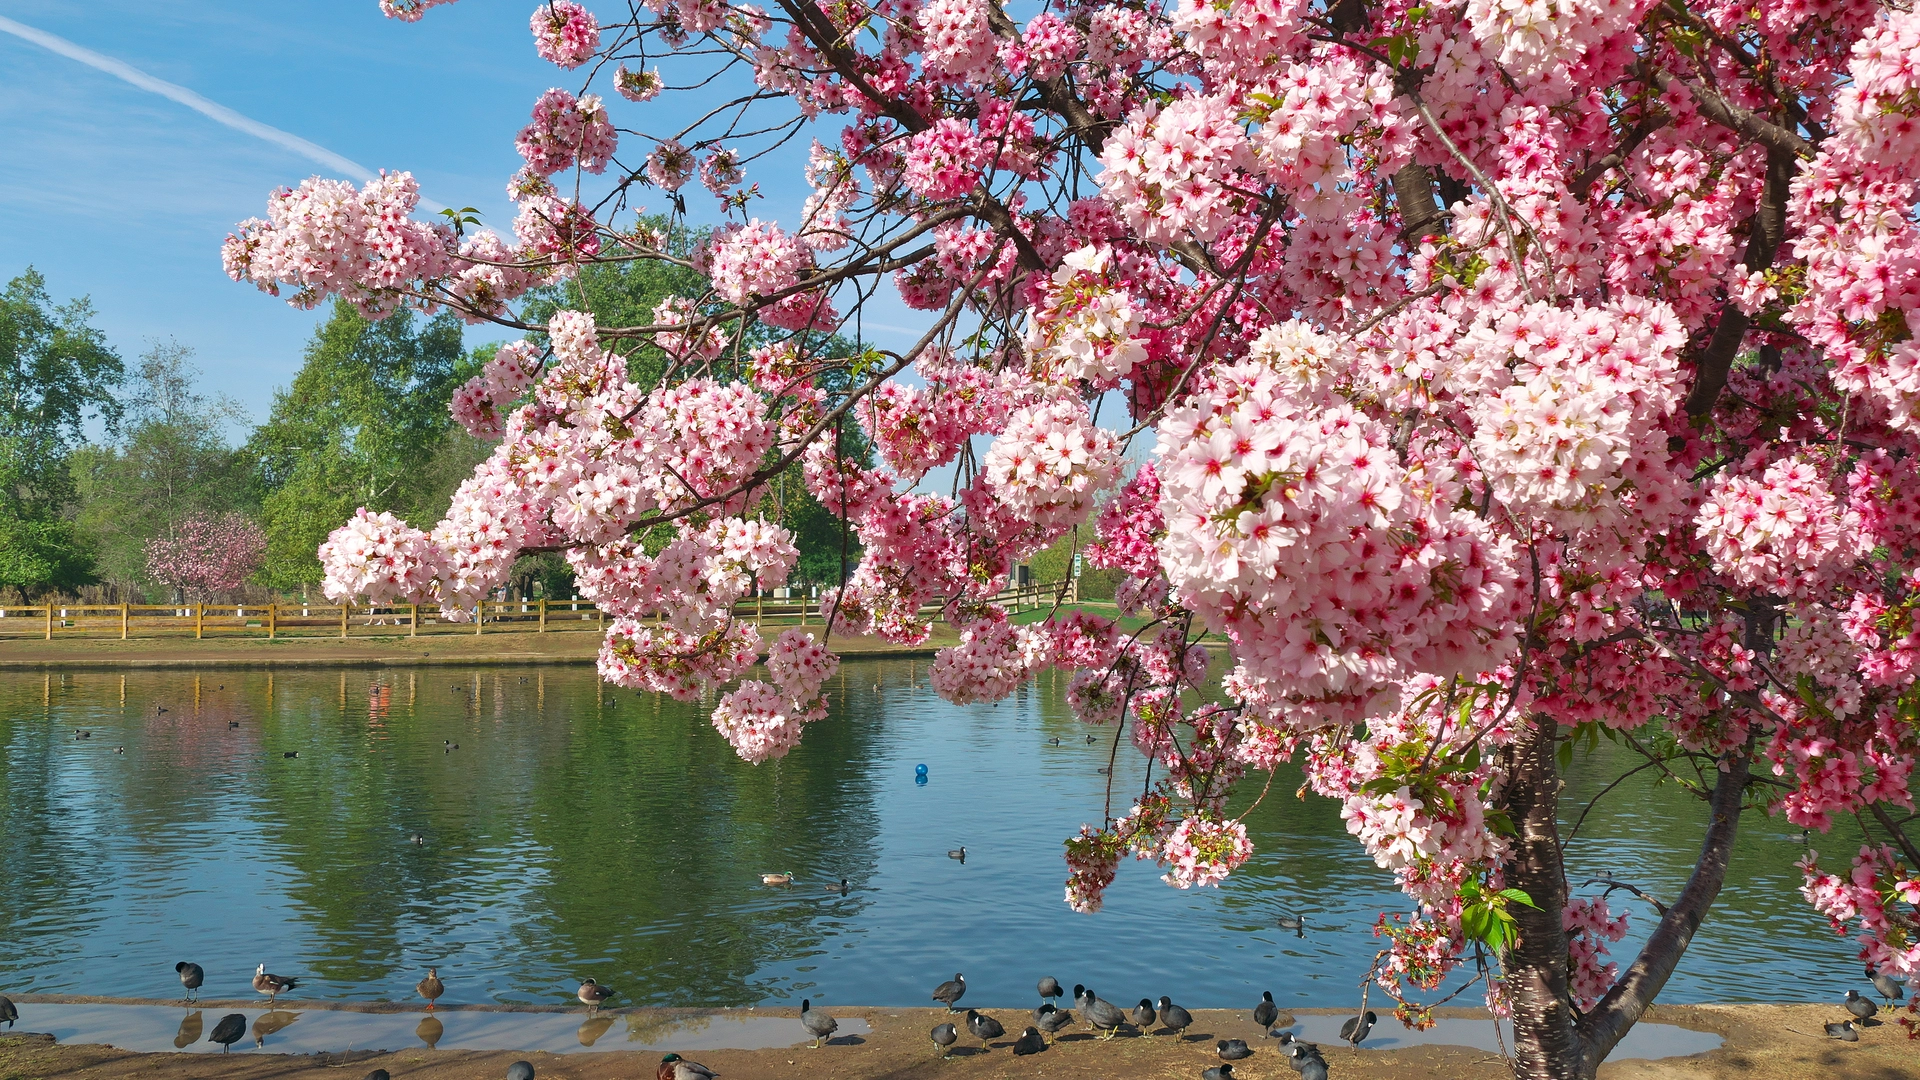 Lake with cherry blossoms